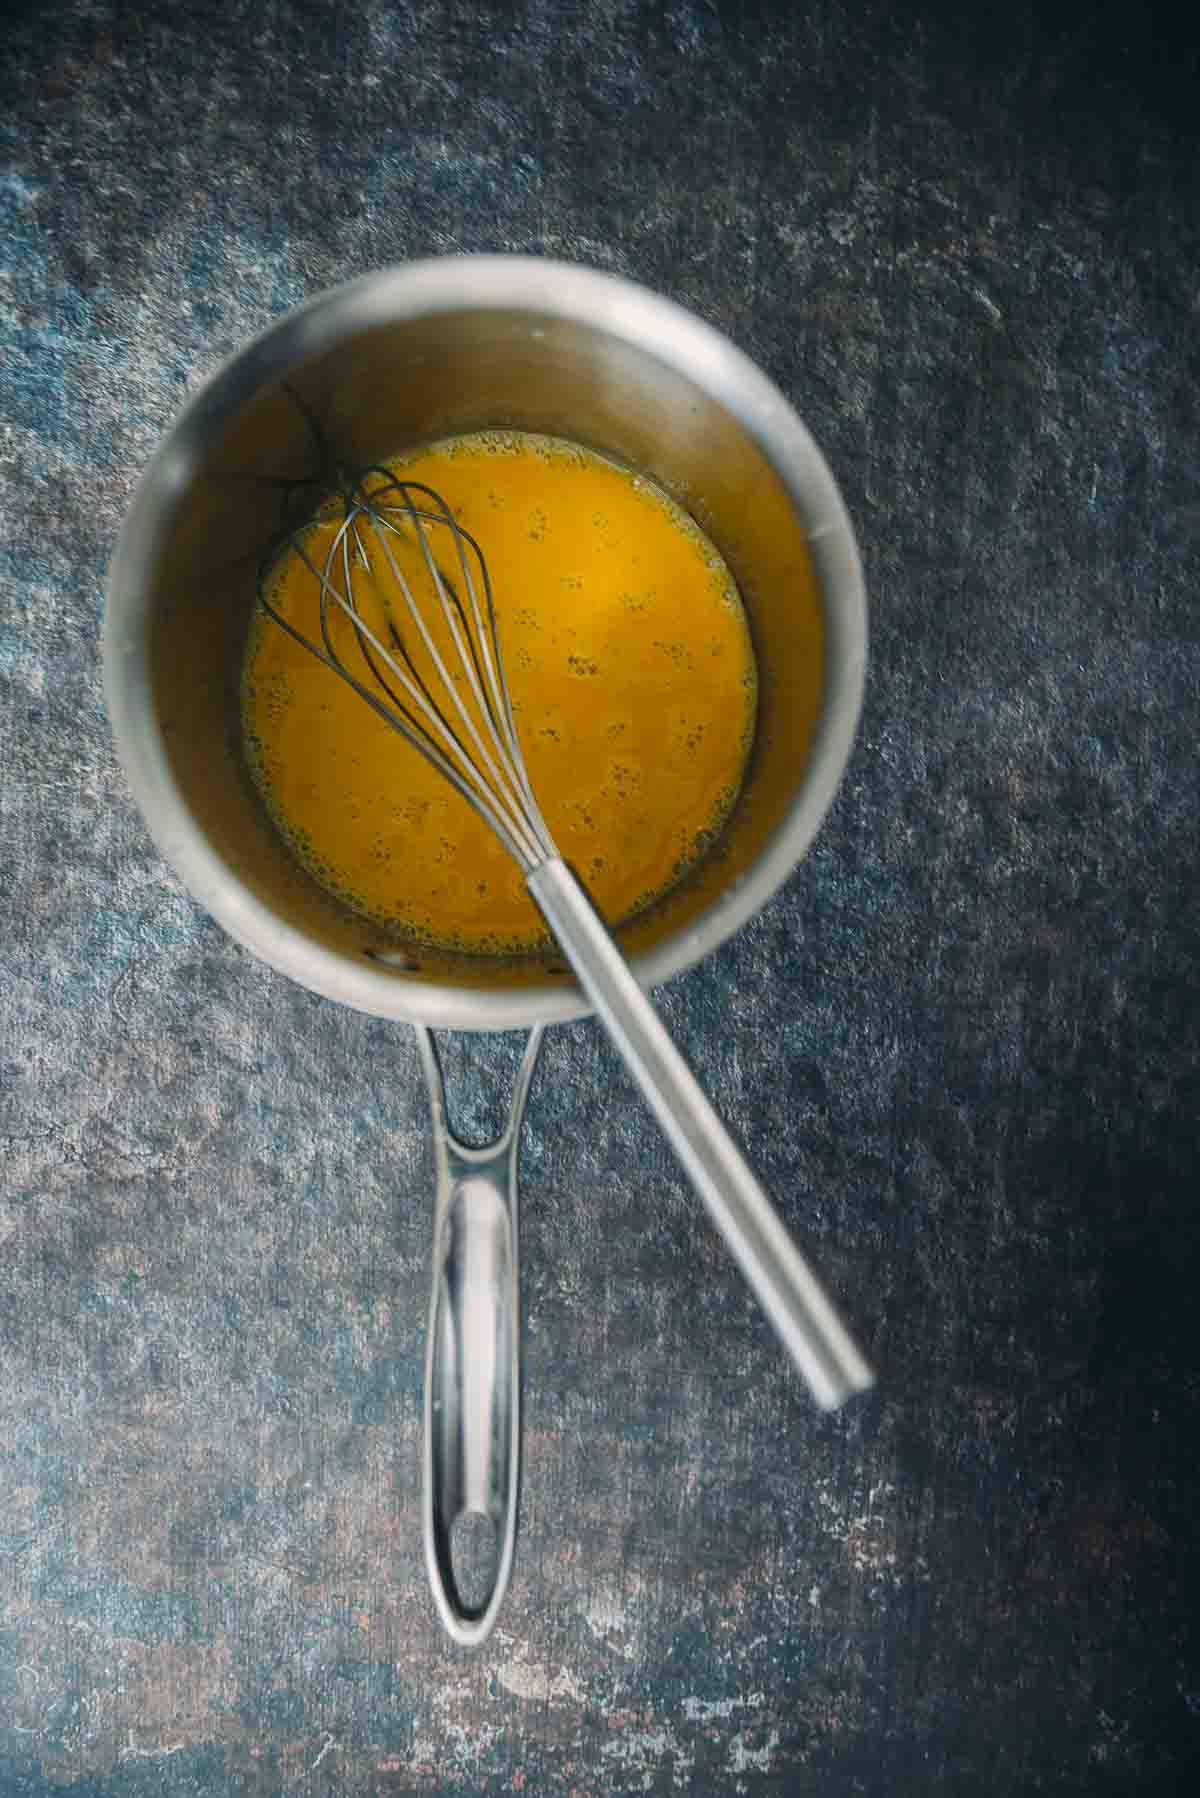 Egg yolks whisked in a sauce pan.